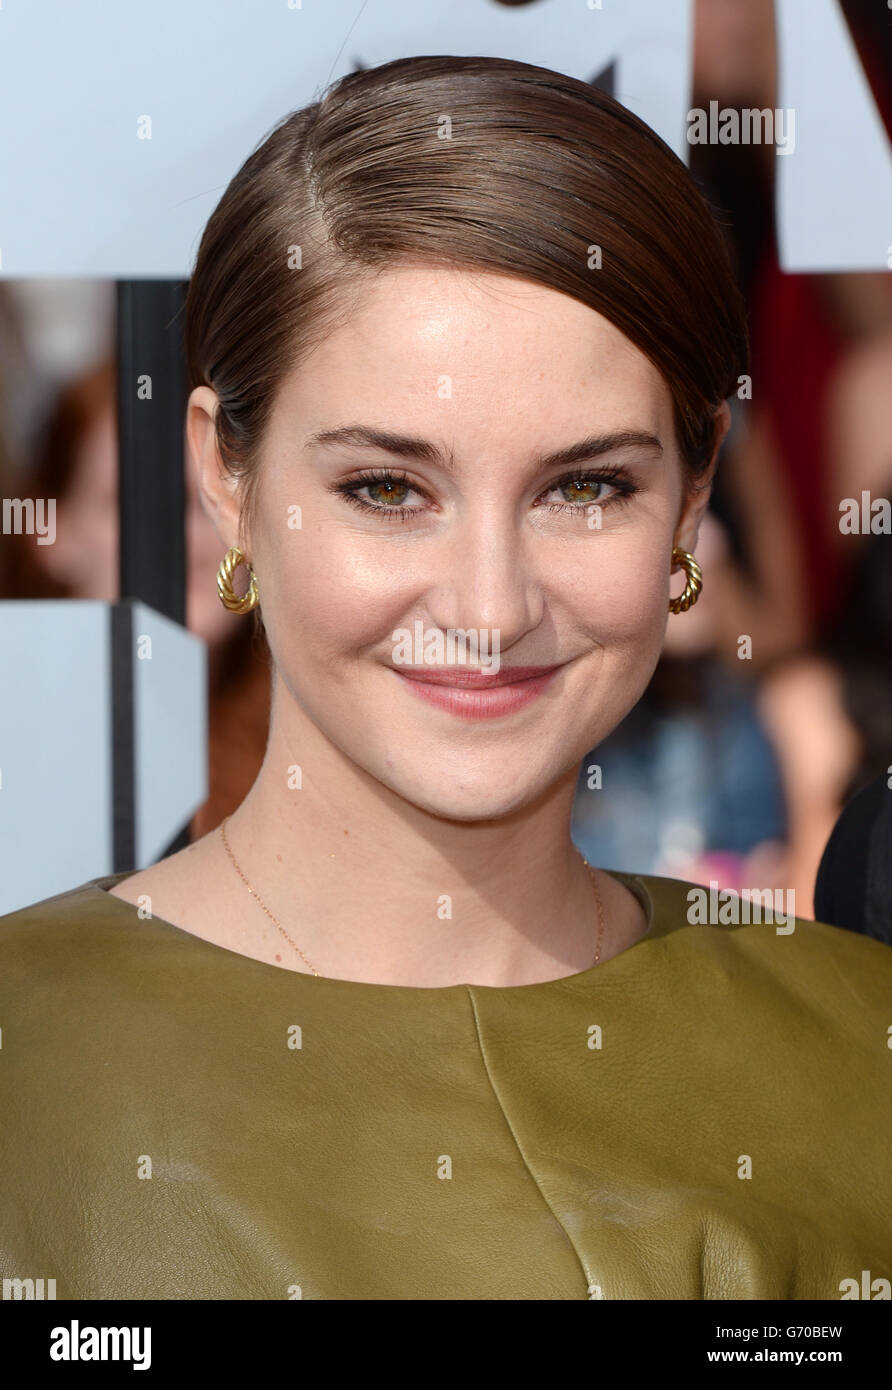 Shailene Woodley arriving at The MTV Movie Awards 2014, at the Nokia Theatre L.A. Live, Los Angeles. Stock Photo